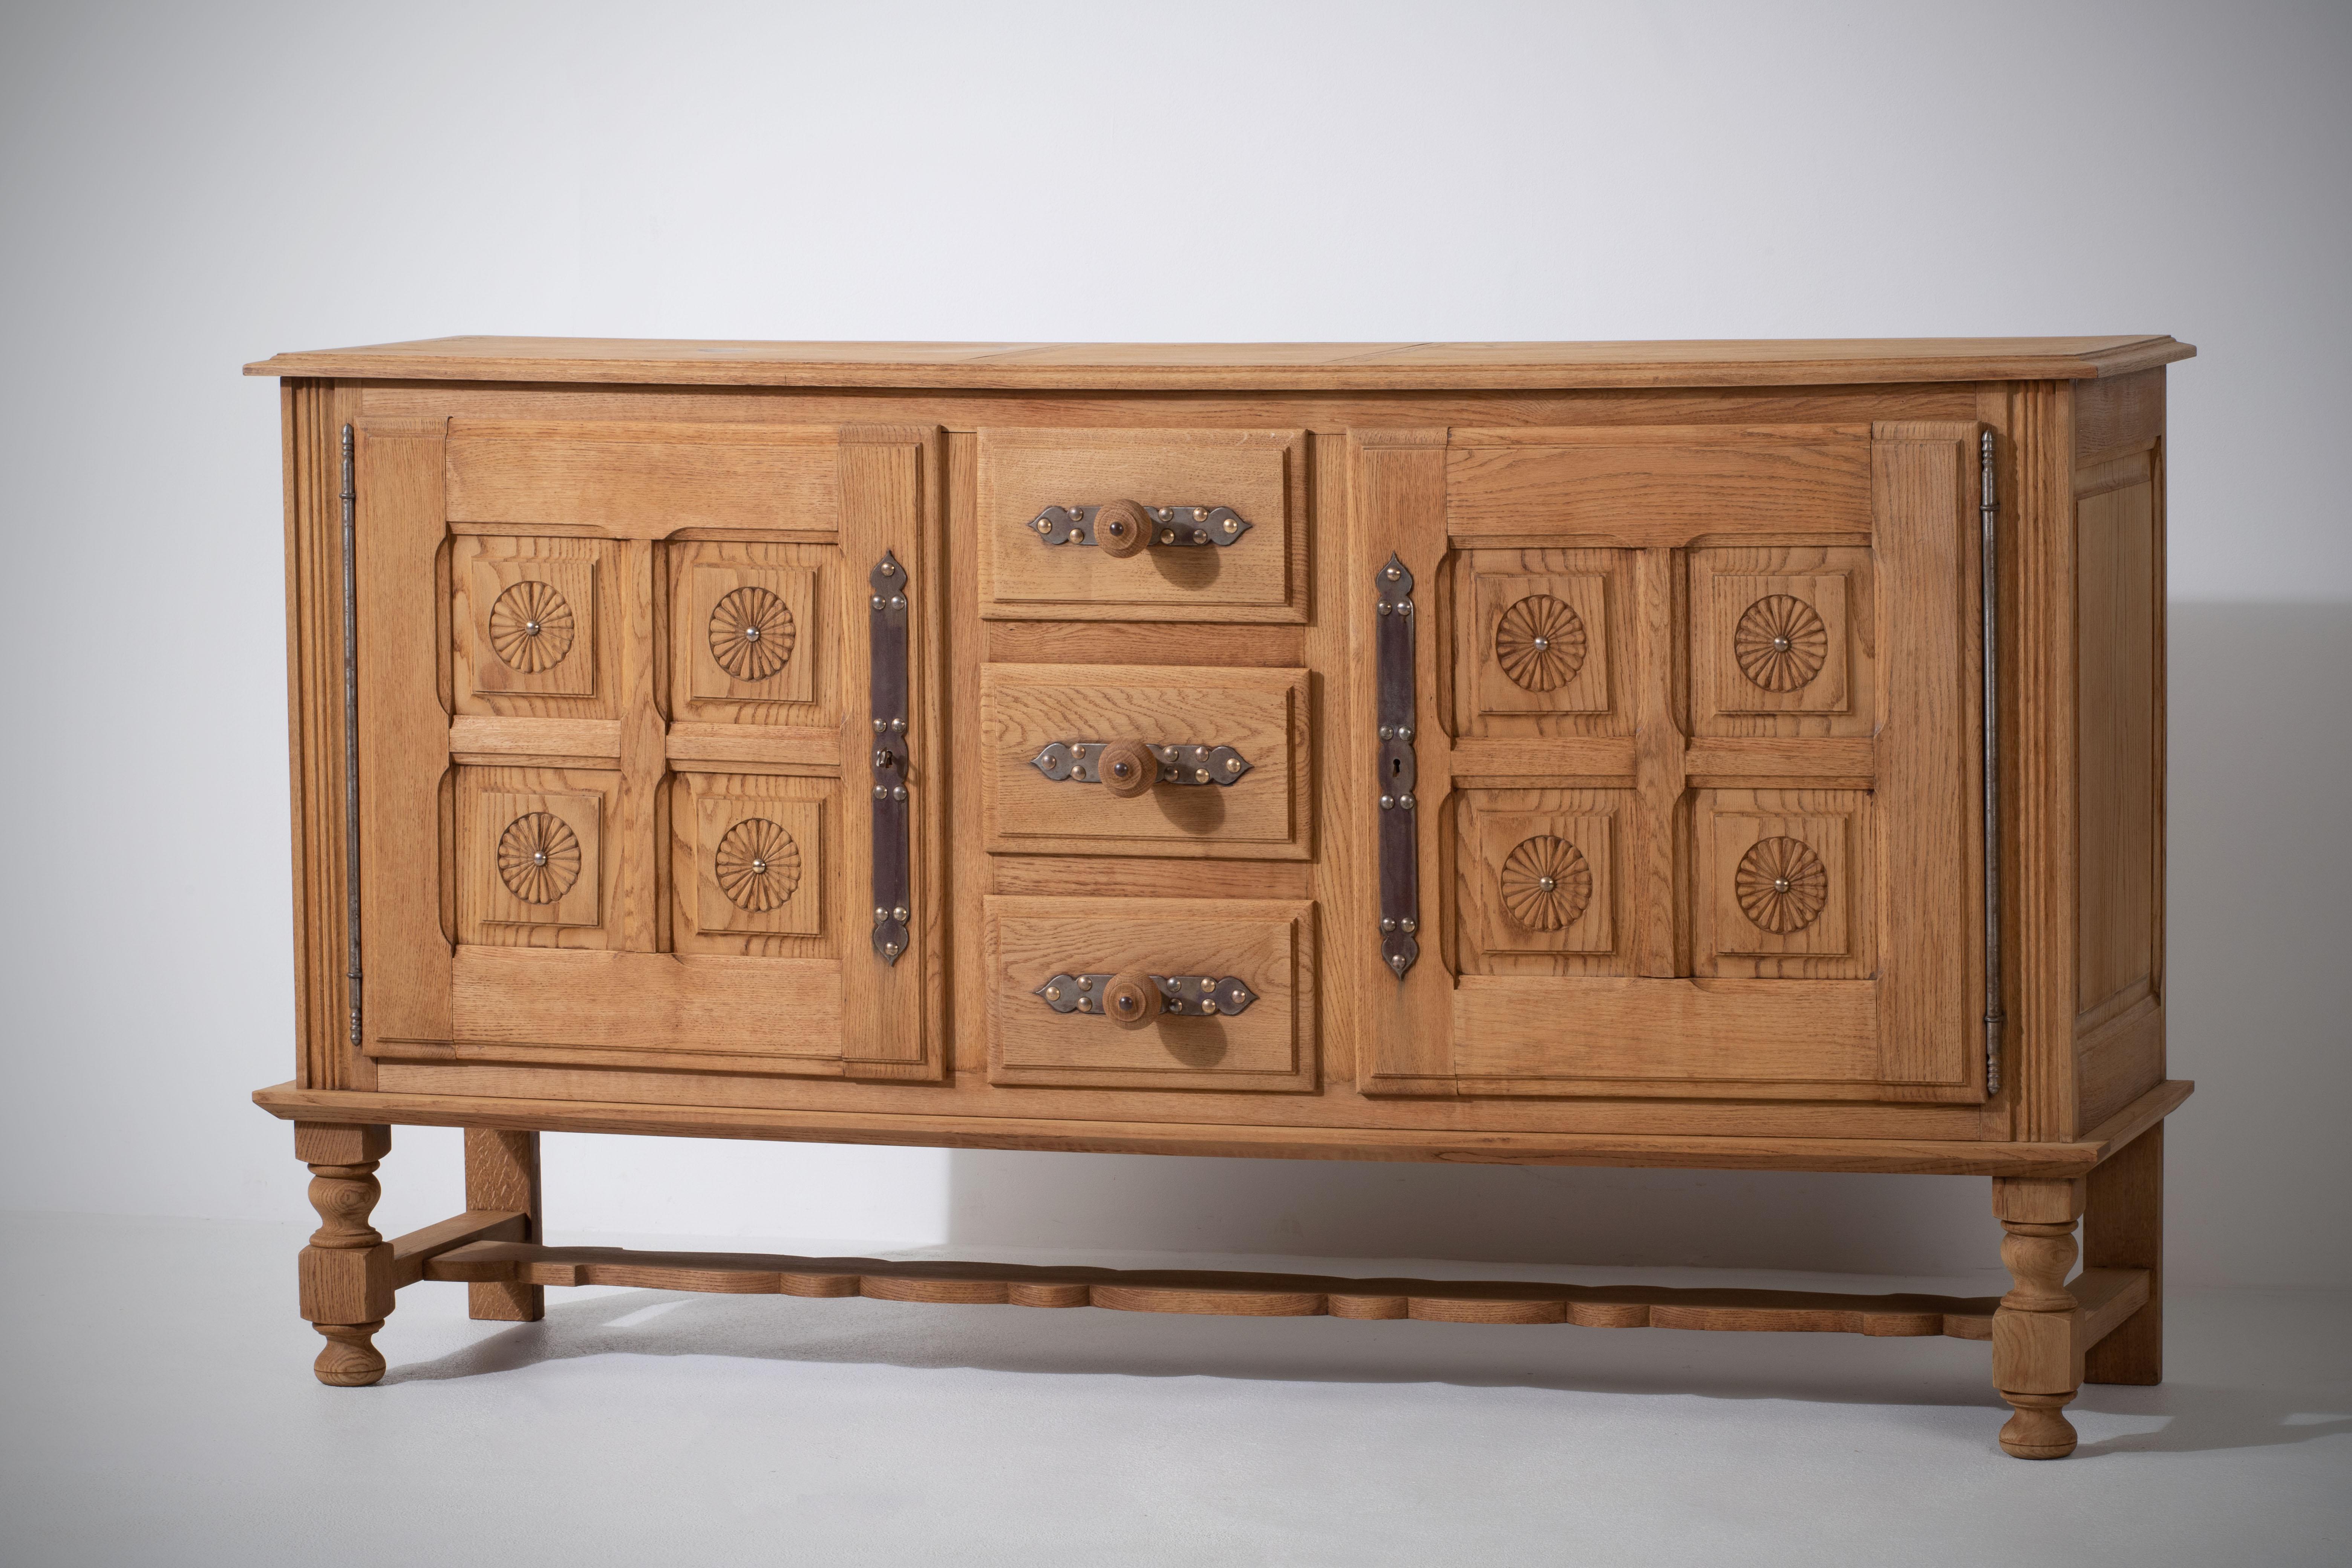 Charming 1950s Bleached Oak sideboard with Hand-Carved Daisies - A Rustic Reims Region Treasure

Introducing a truly captivating bleached oak sideboard, rich in character and history, discovered in the heart of France's Reims region. The